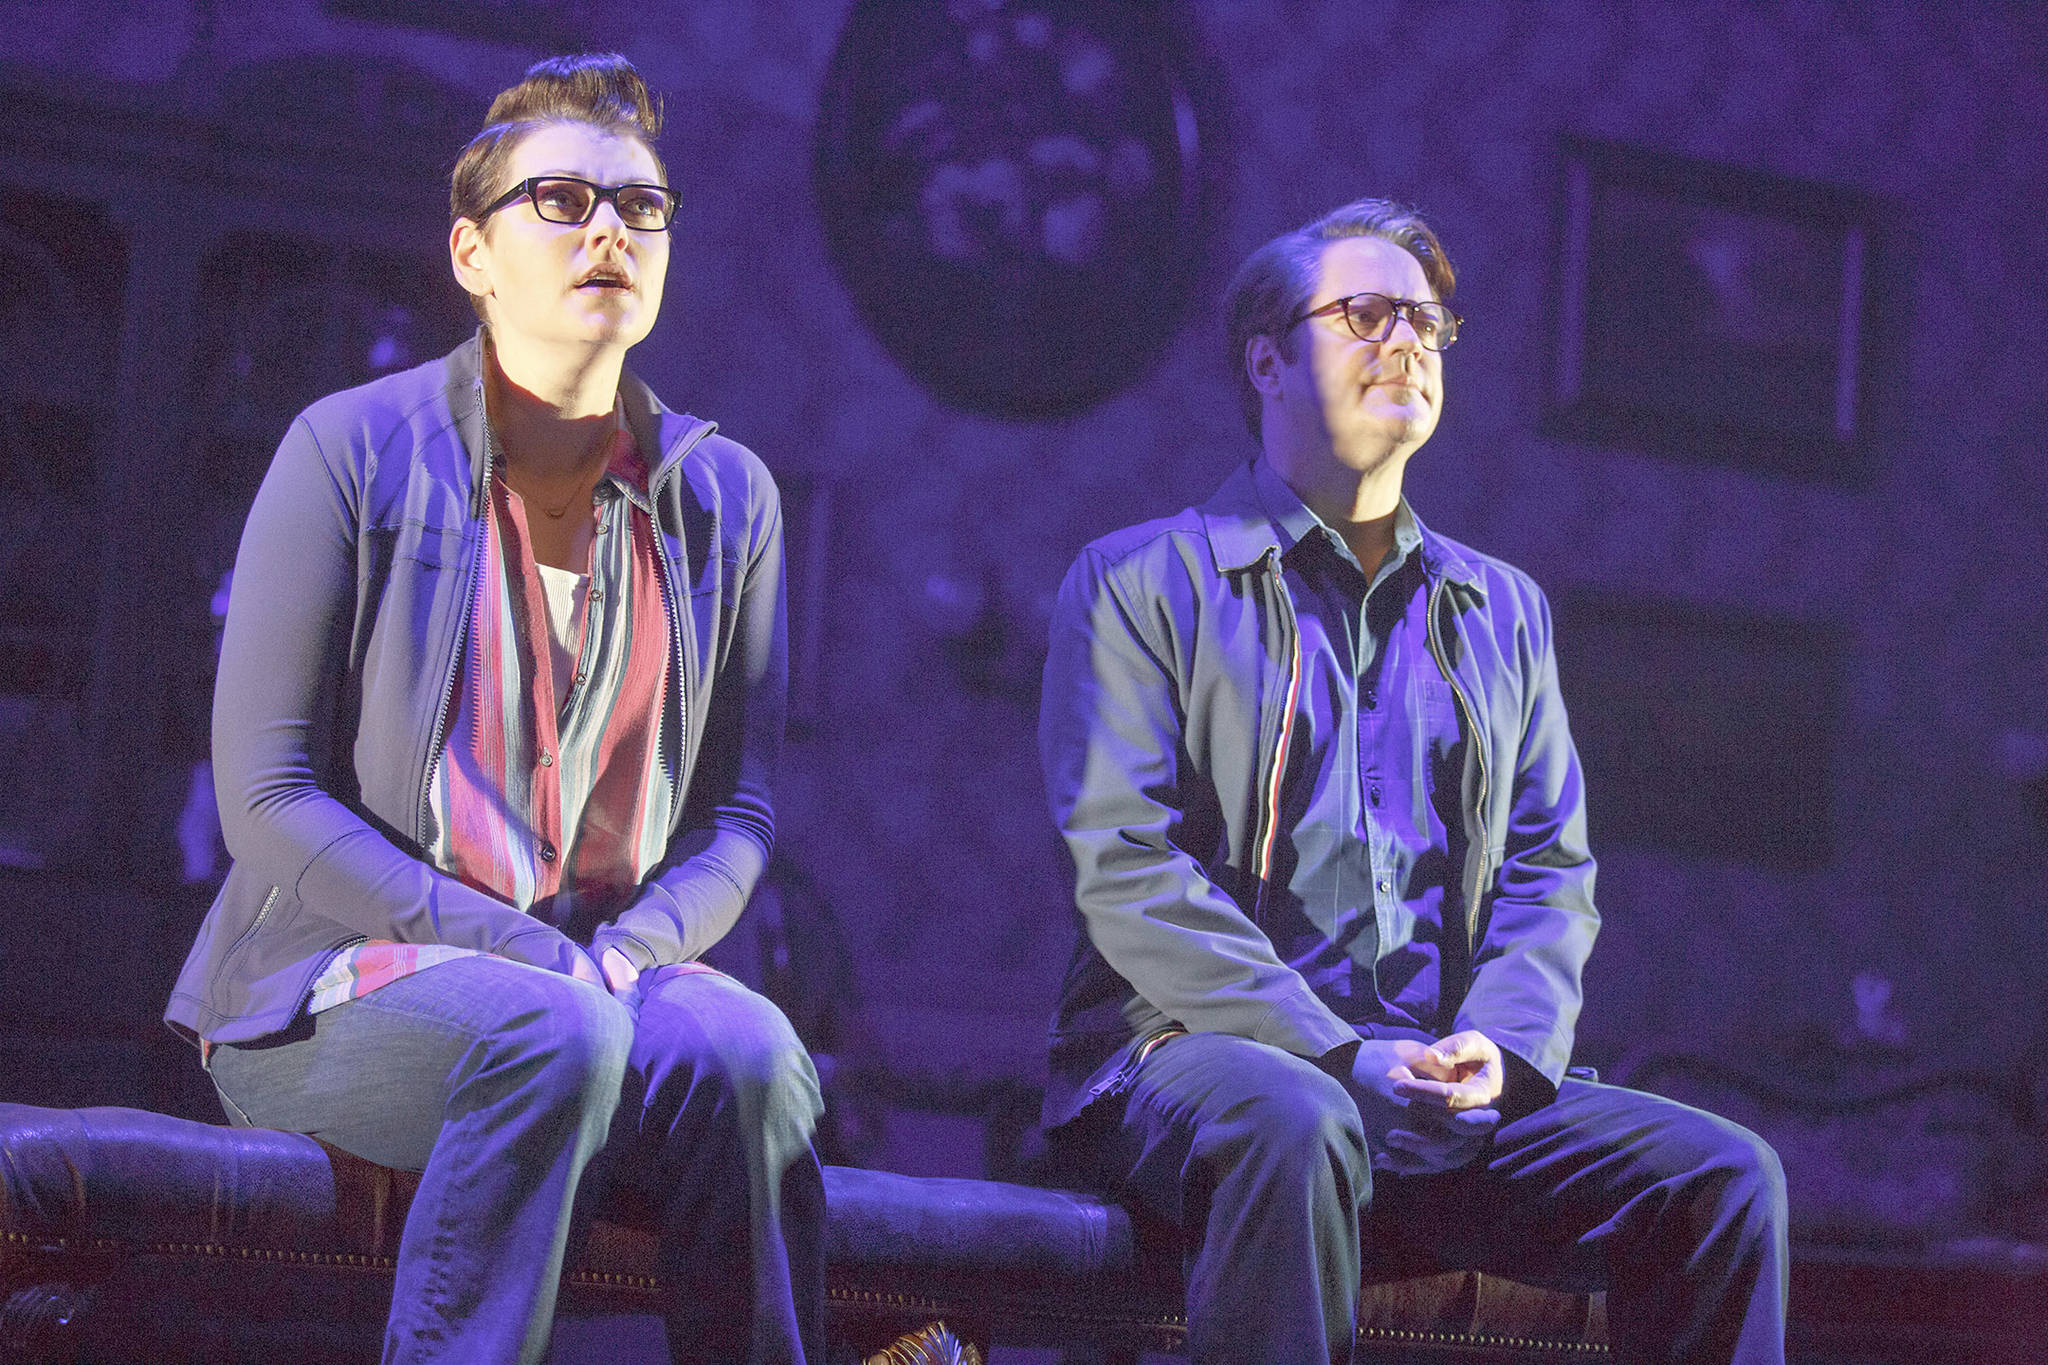 Kate Shindle as ‘Alison’ and Robert Petkoff as ‘Bruce’ in Fun Home. Photo by Joan Marcus